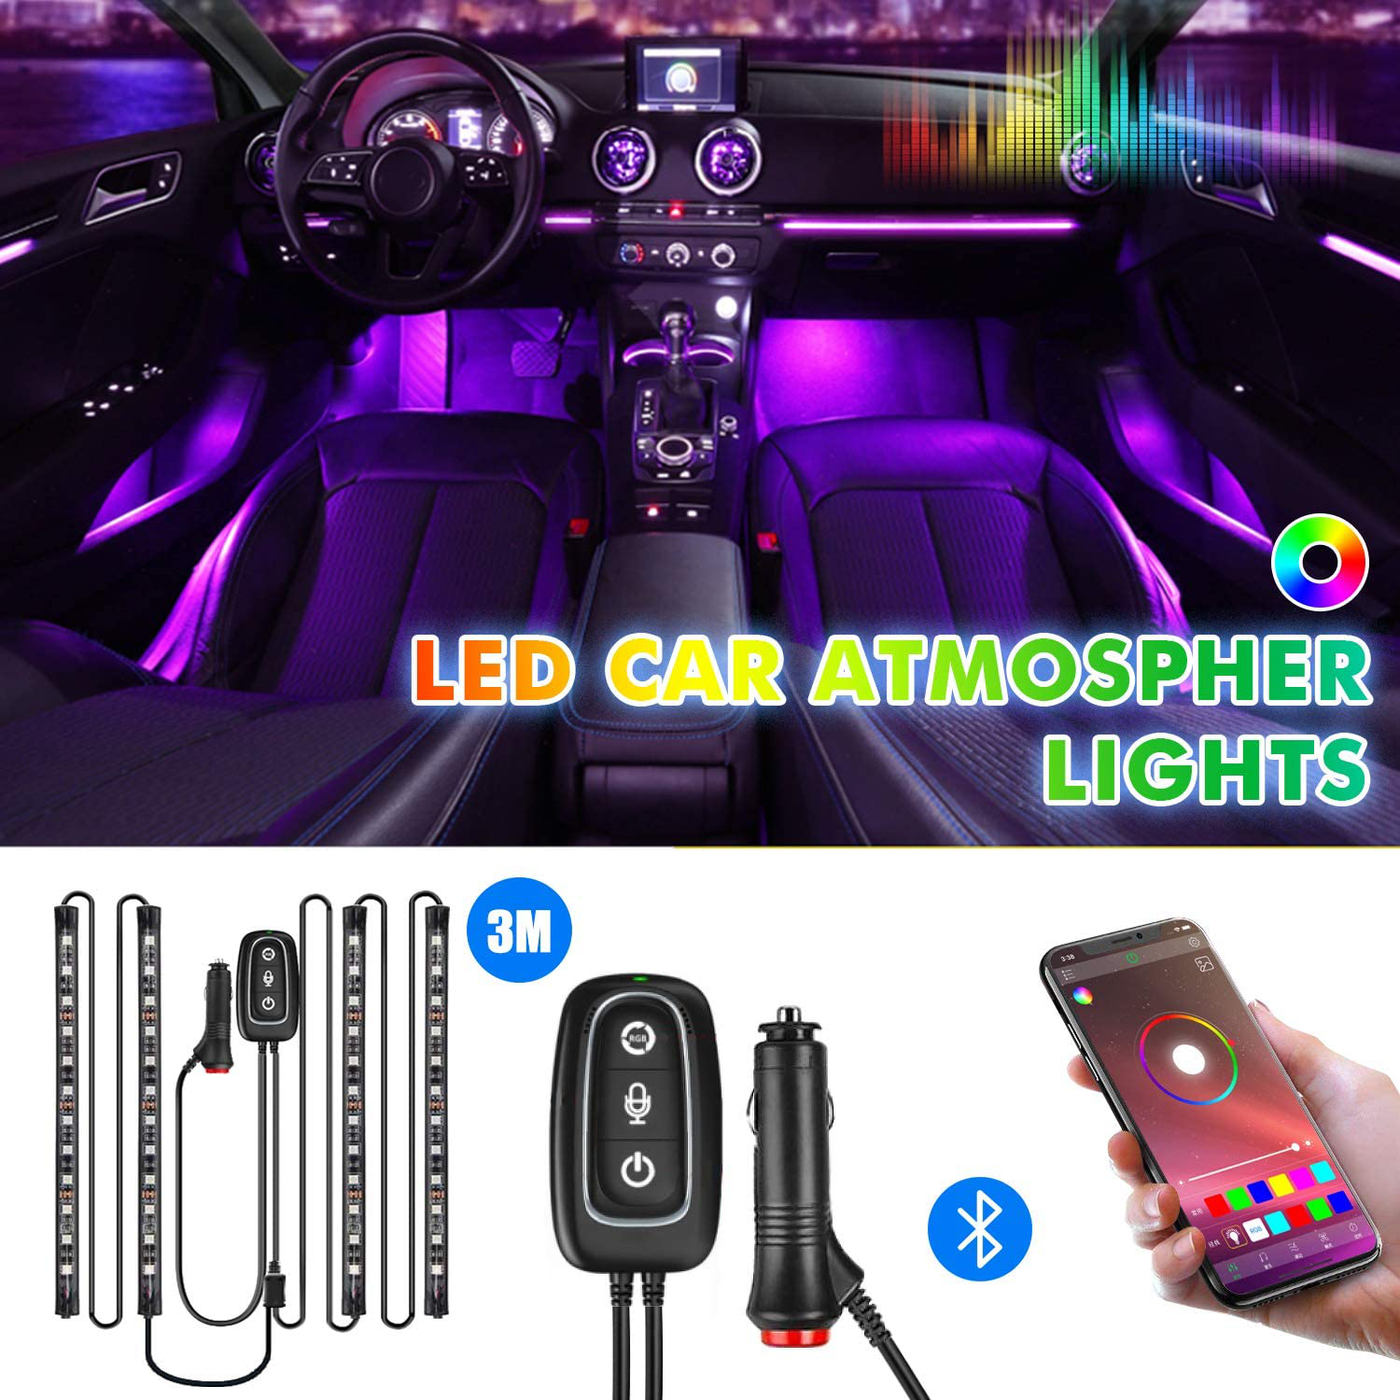 MEWTWO Car LED Strip Lights Interior ,LED Strip Lights for Cars Upgrade Two-Line Design Waterproof APP Controller Lighting Kits with Wireless Remote Control & Music Sensor, DC 12V